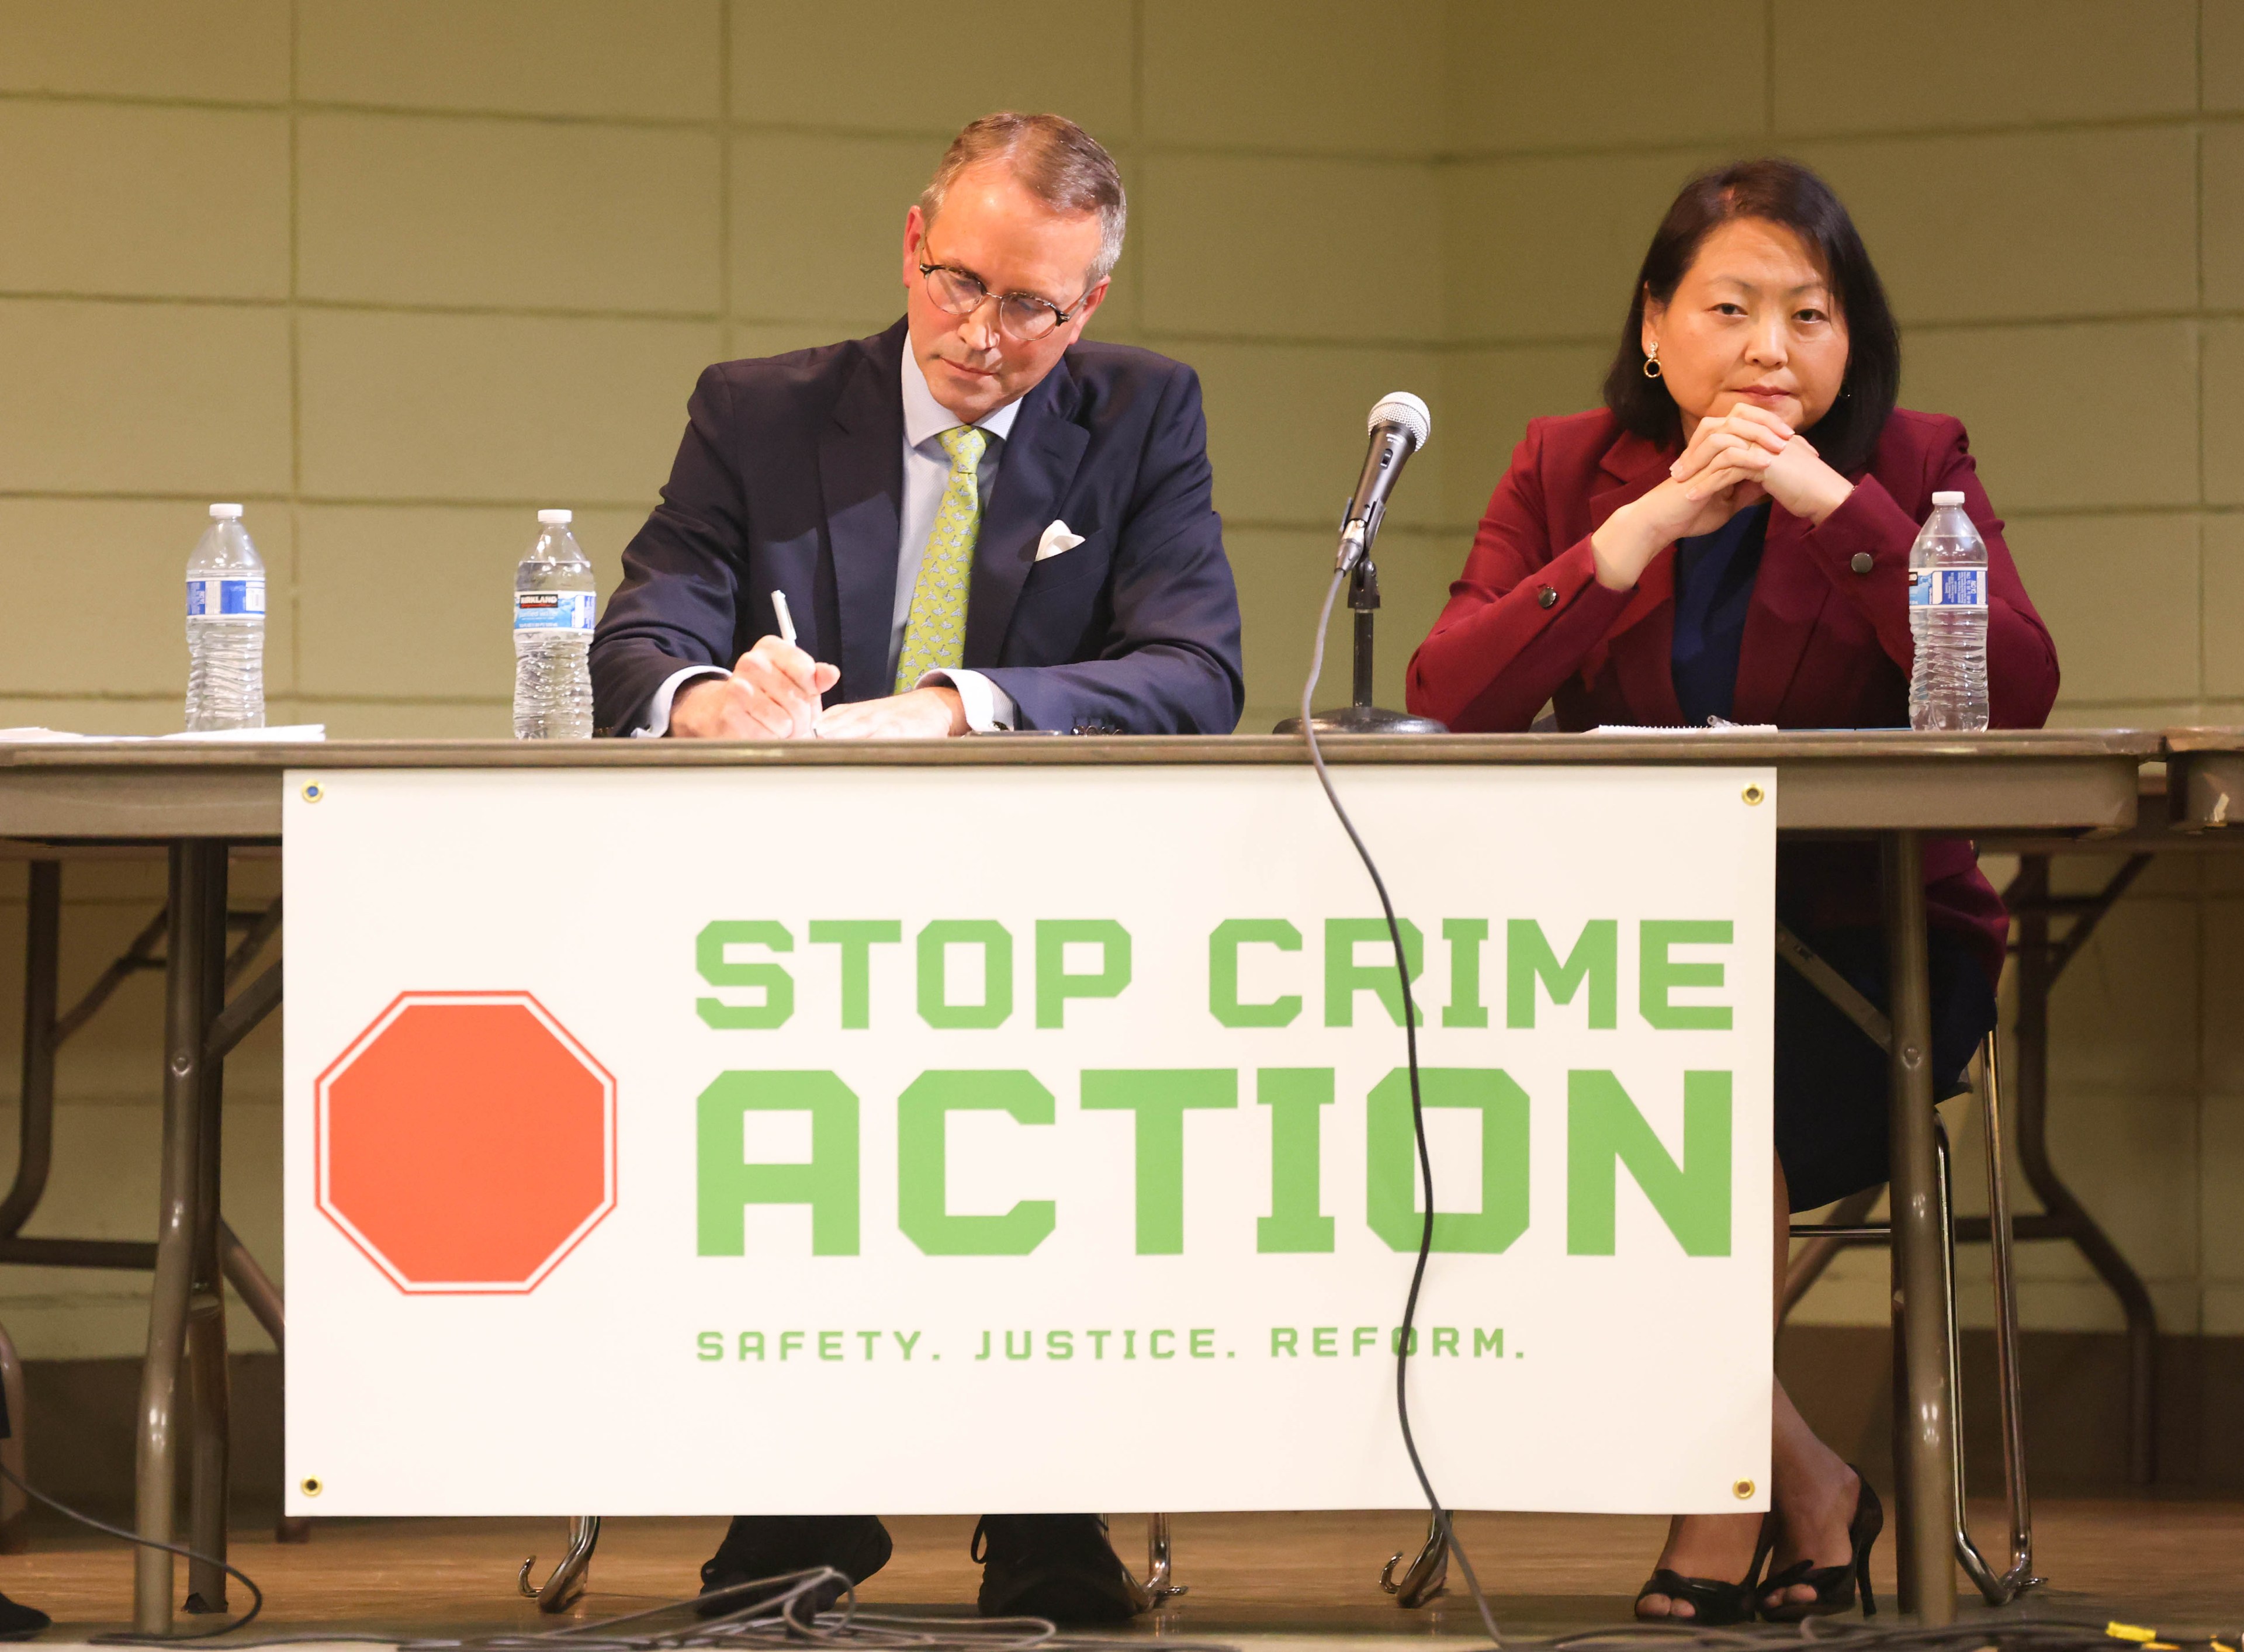 a man in a suit and woman in a red top sit at a table with microphones with a banner that says &quot;stop crime action.&quot;